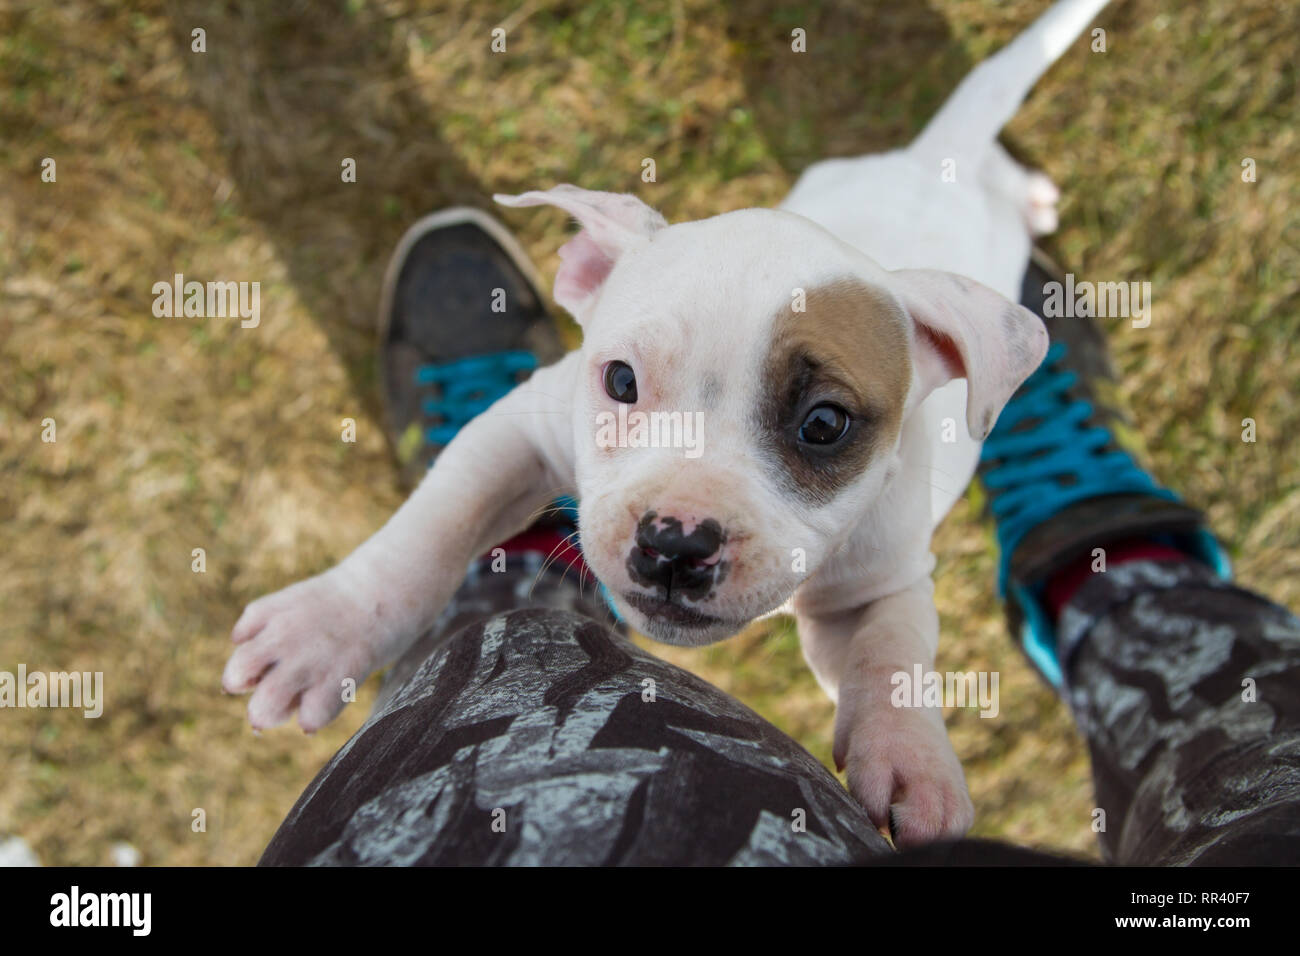 White American Pit Bull Terrier with eye patch jumping at owner Stock Photo